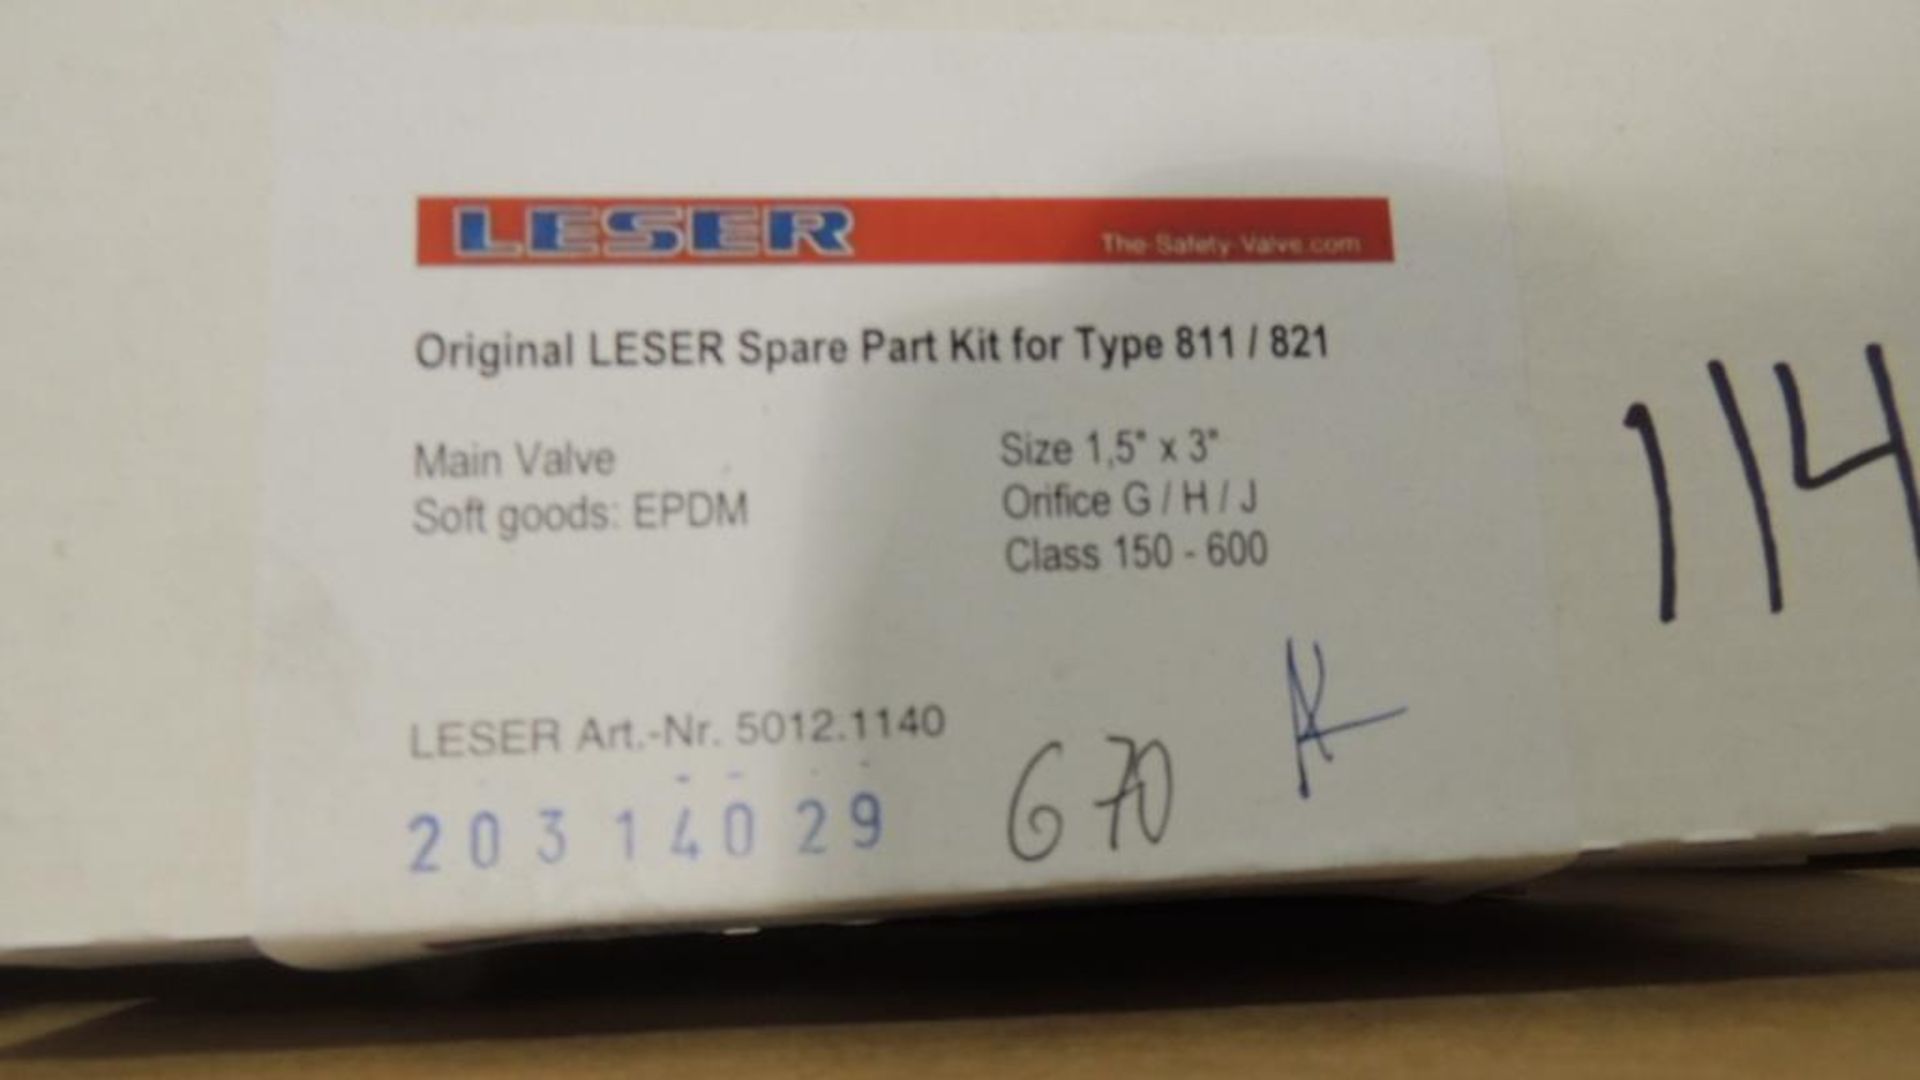 Large Quantity of Leser Relief and Safety Valves, plus Spare Parts Kits - Image 14 of 374